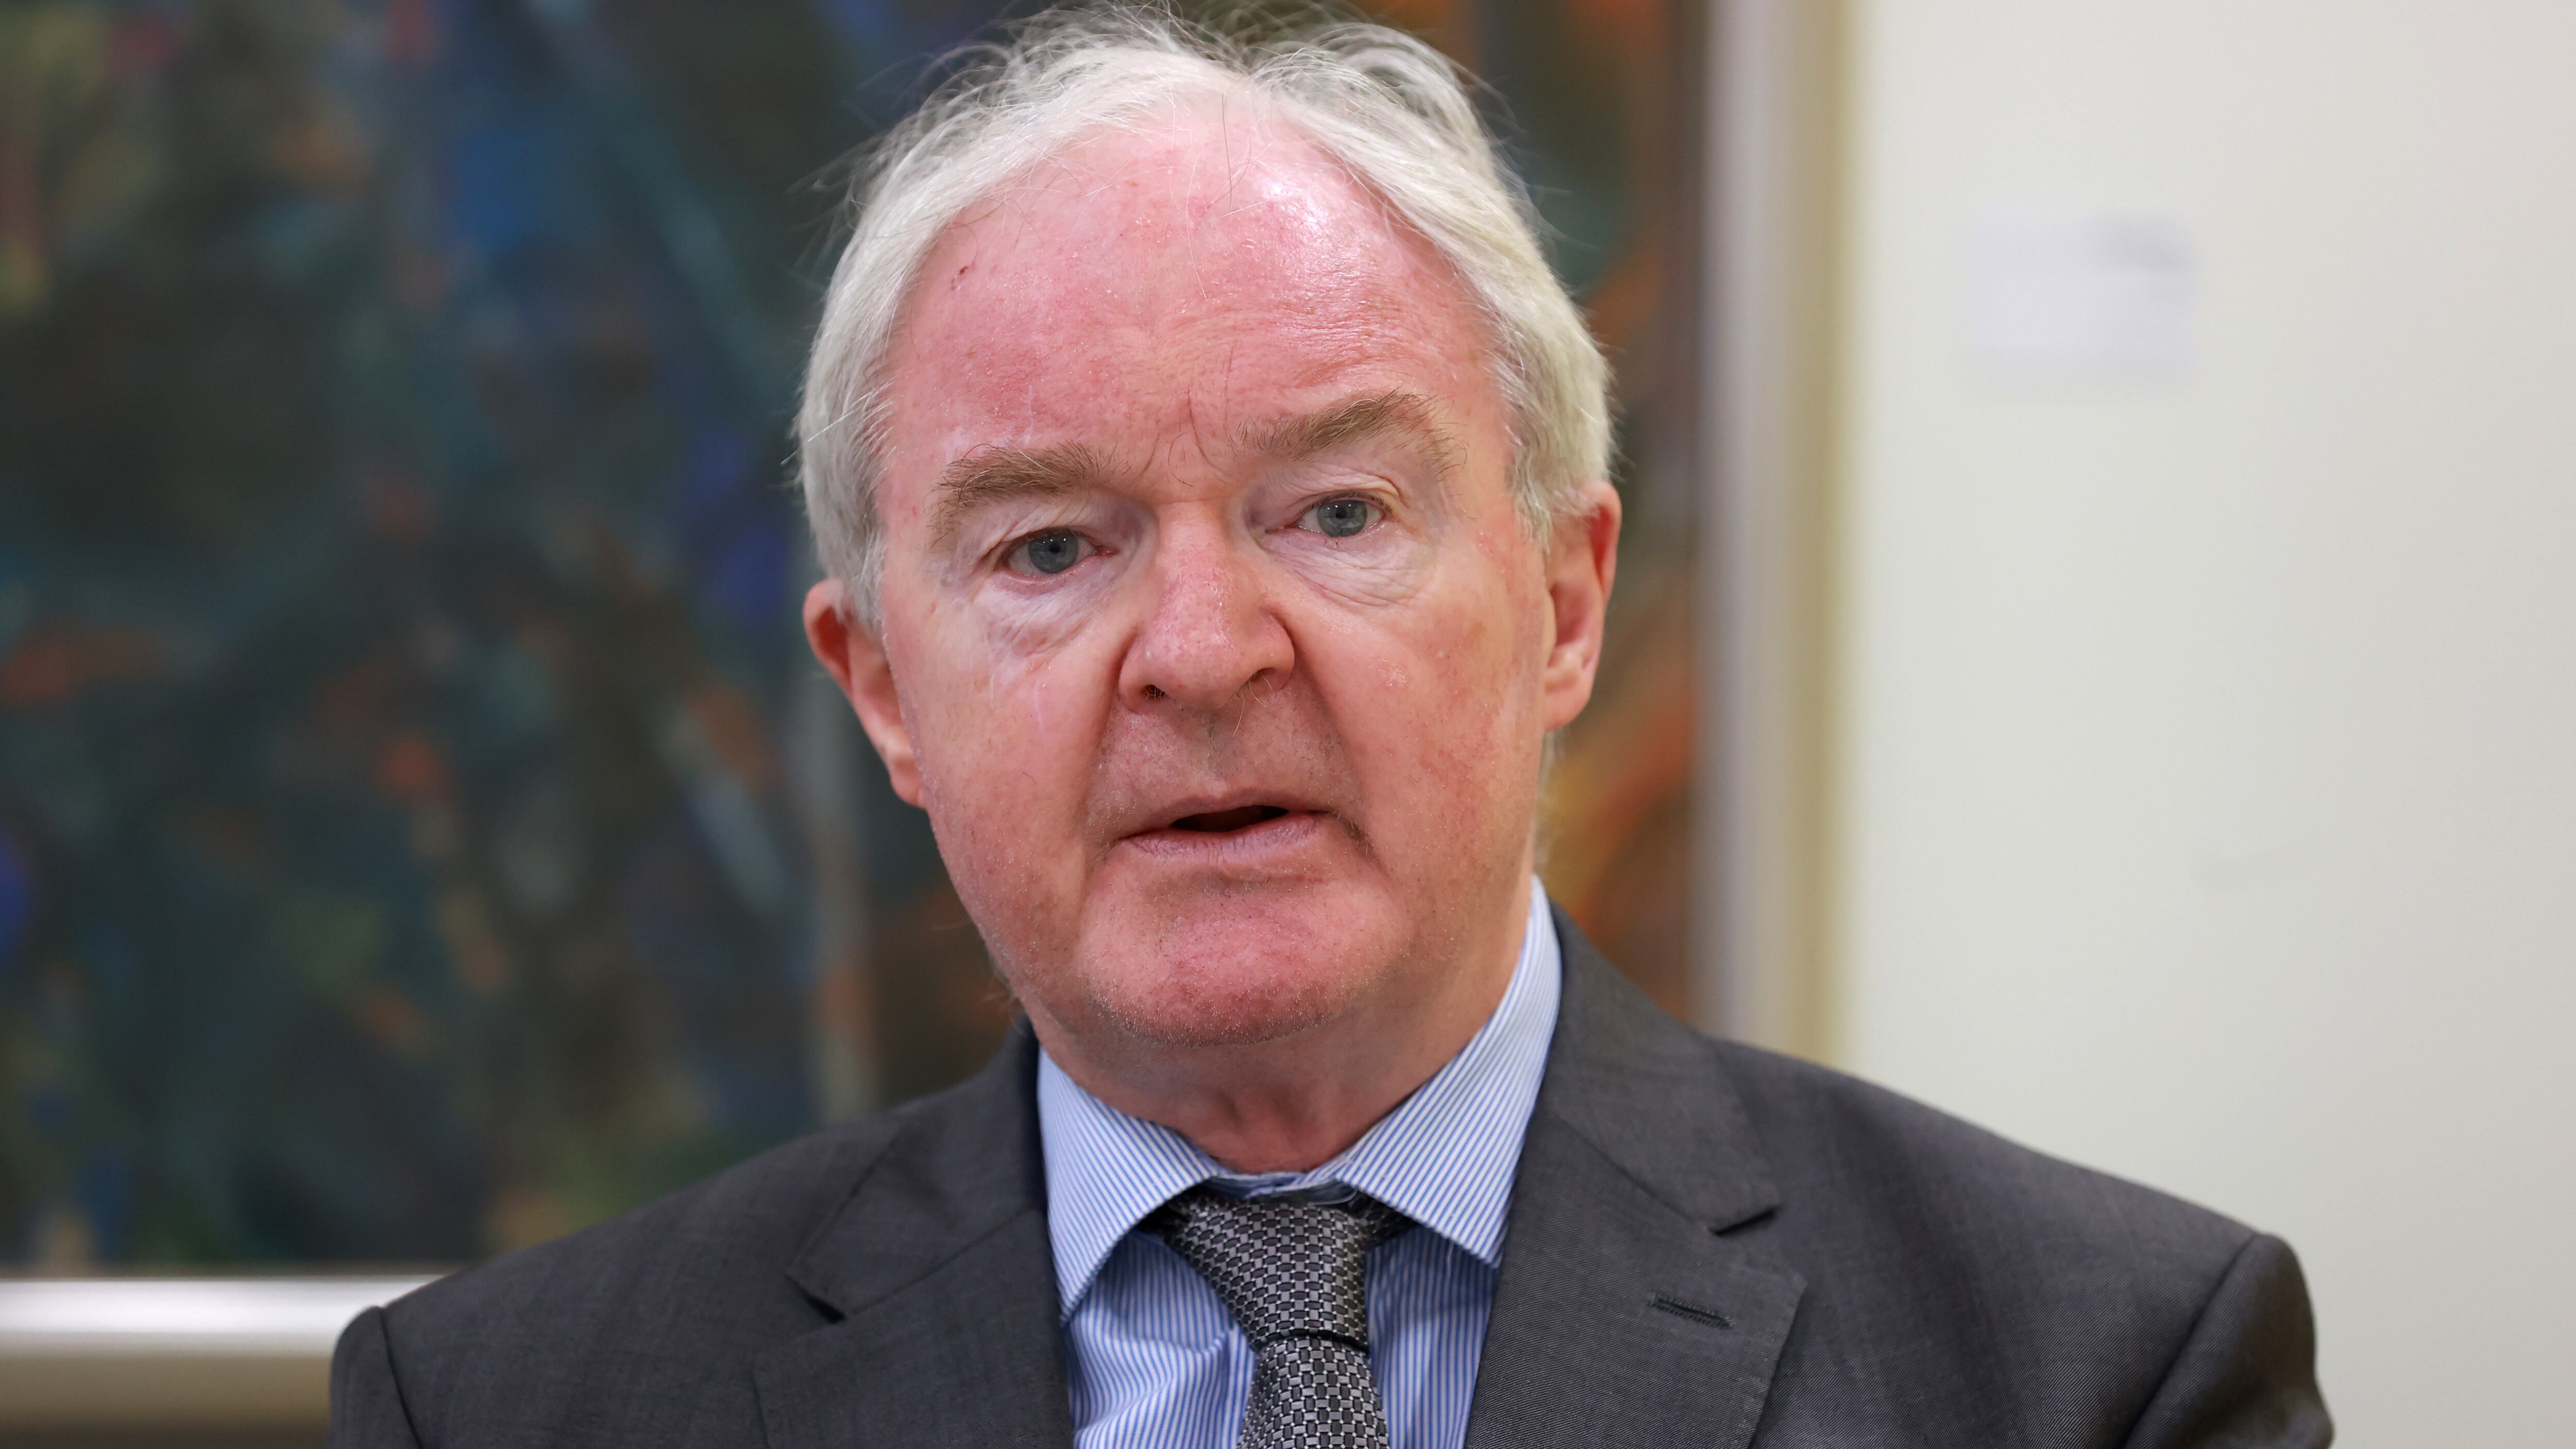 Sir Declan Morgan will lead the Independent Commission for Reconciliation and Information Recovery